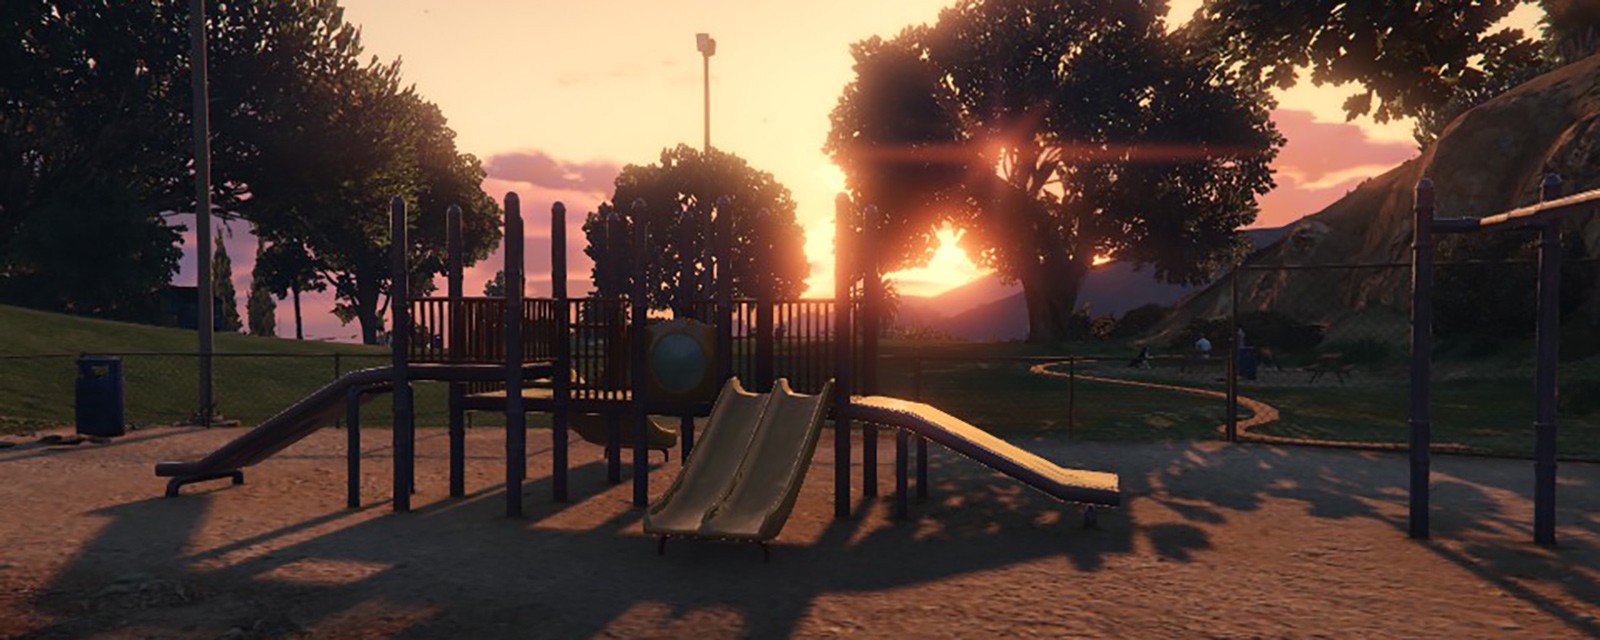 An in-game scene of a playground.